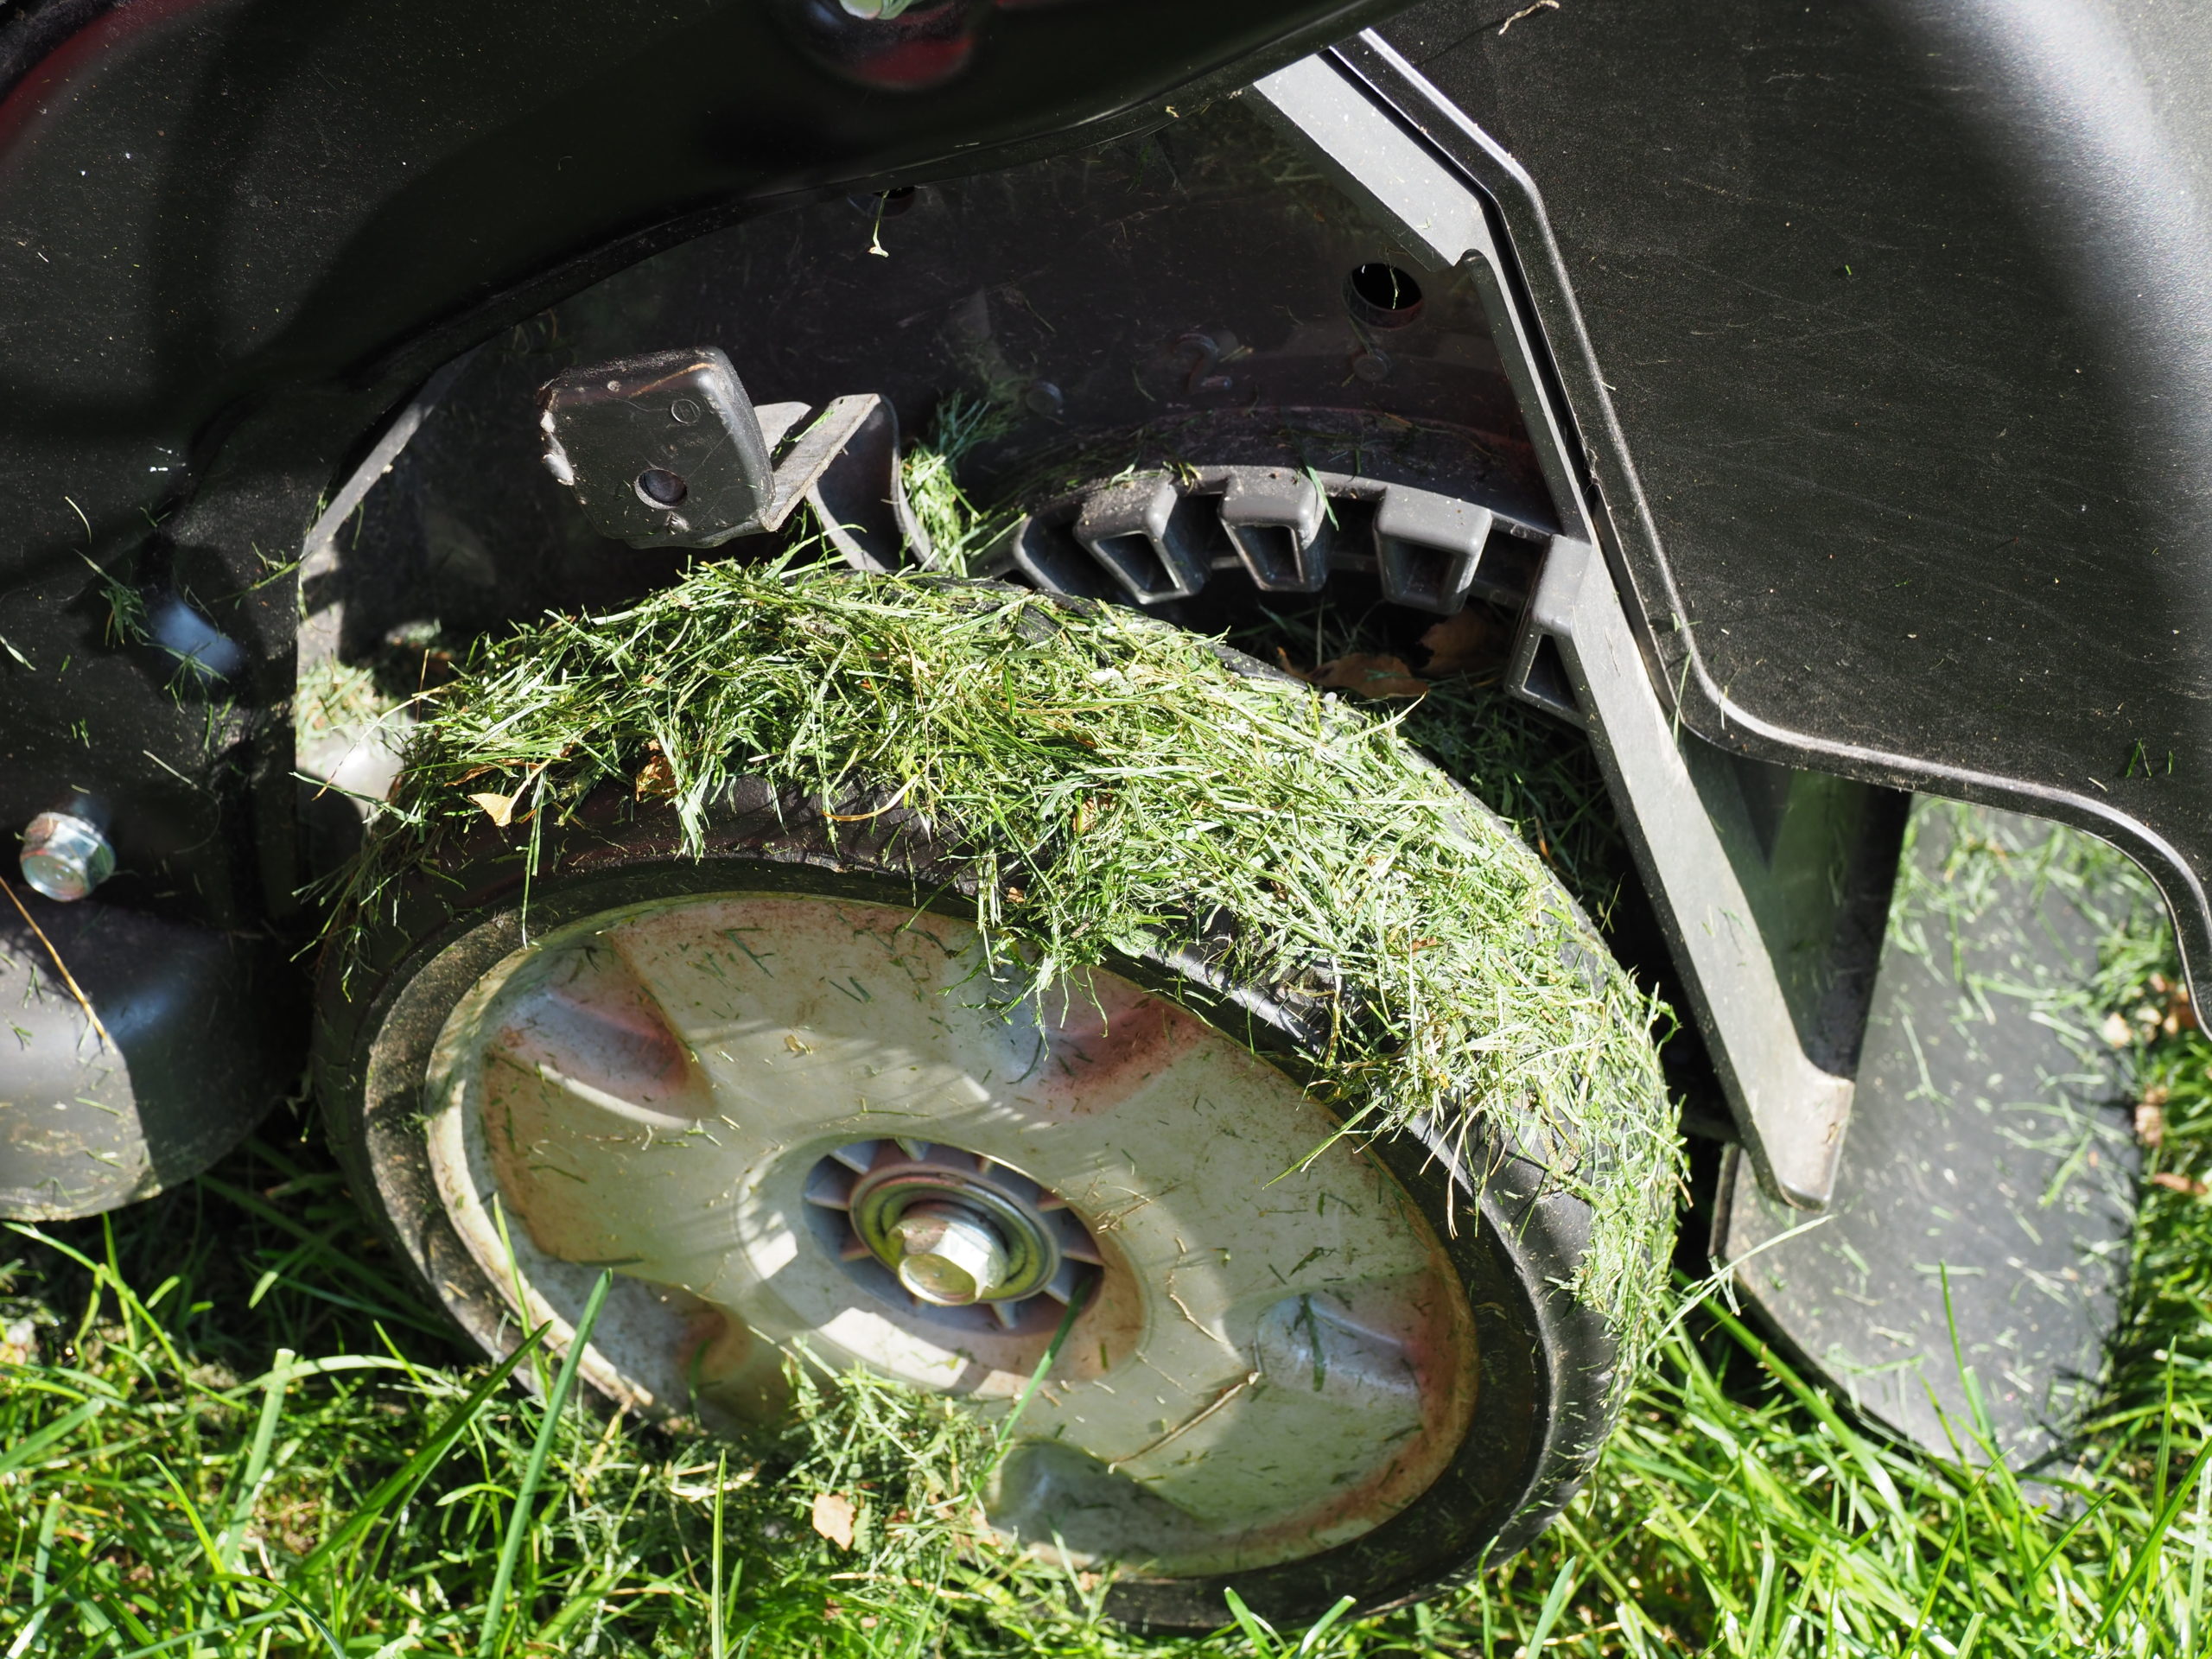 The left rear wheel on this Honda mulching mower seems to accumulate grass clippings making for an uneven cut. Note the lever to the upper left over the wheel.  This is for height control and can easily be dislodged by a vine or stick it comes into contact with also causing an uneven cut. These height levers can also be difficult to adjust.